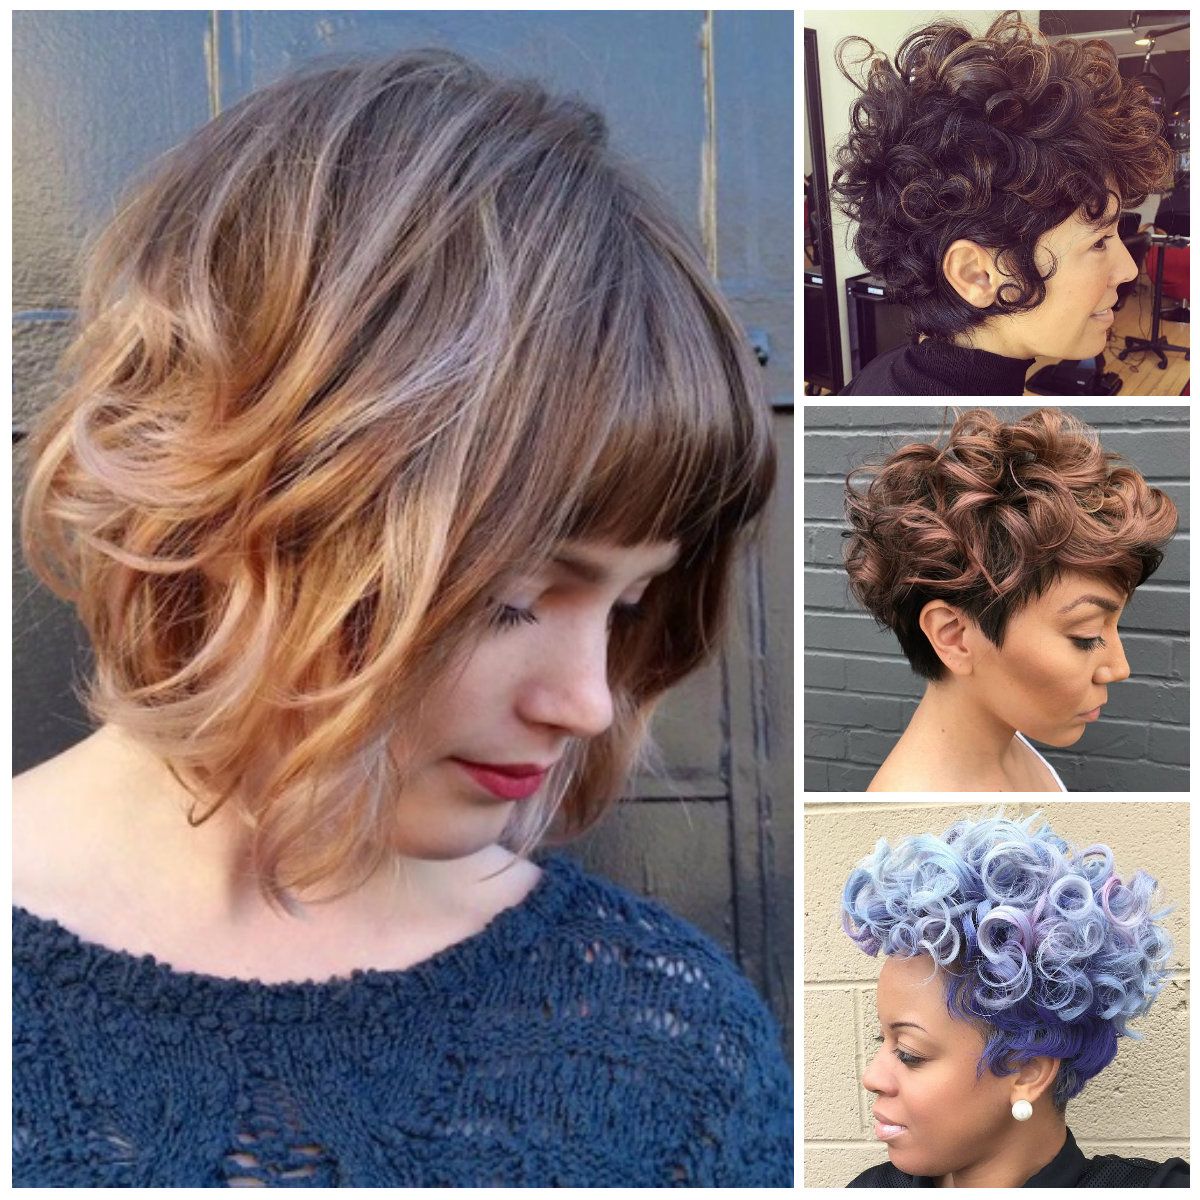 40 Super Cute Short Bob Hairstyles For Women 2018 | Styles Weekly Regarding Short Bob For Curly Hairstyles (View 15 of 25)